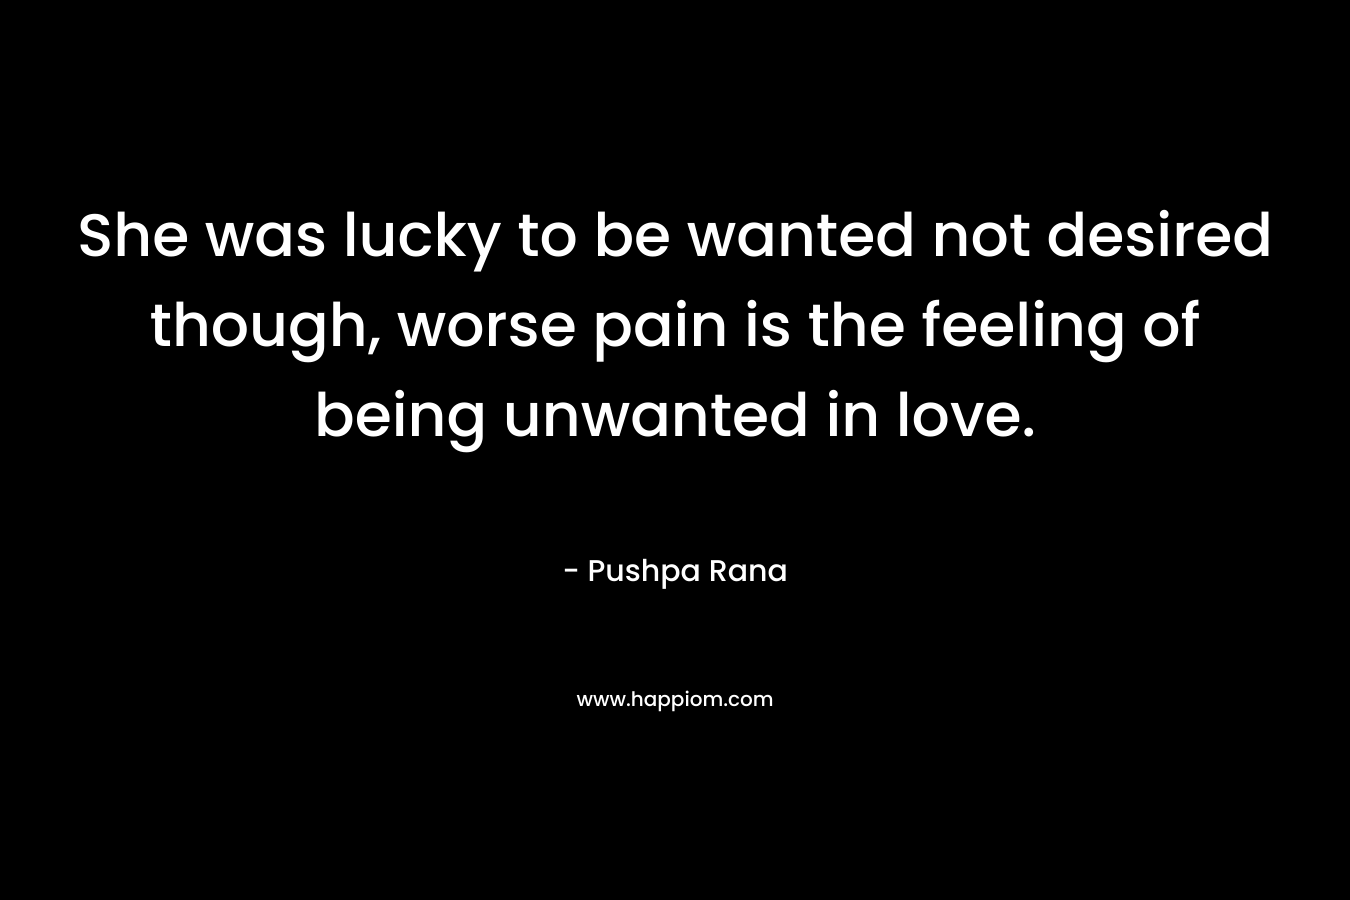 She was lucky to be wanted not desired though, worse pain is the feeling of being unwanted in love. – Pushpa Rana